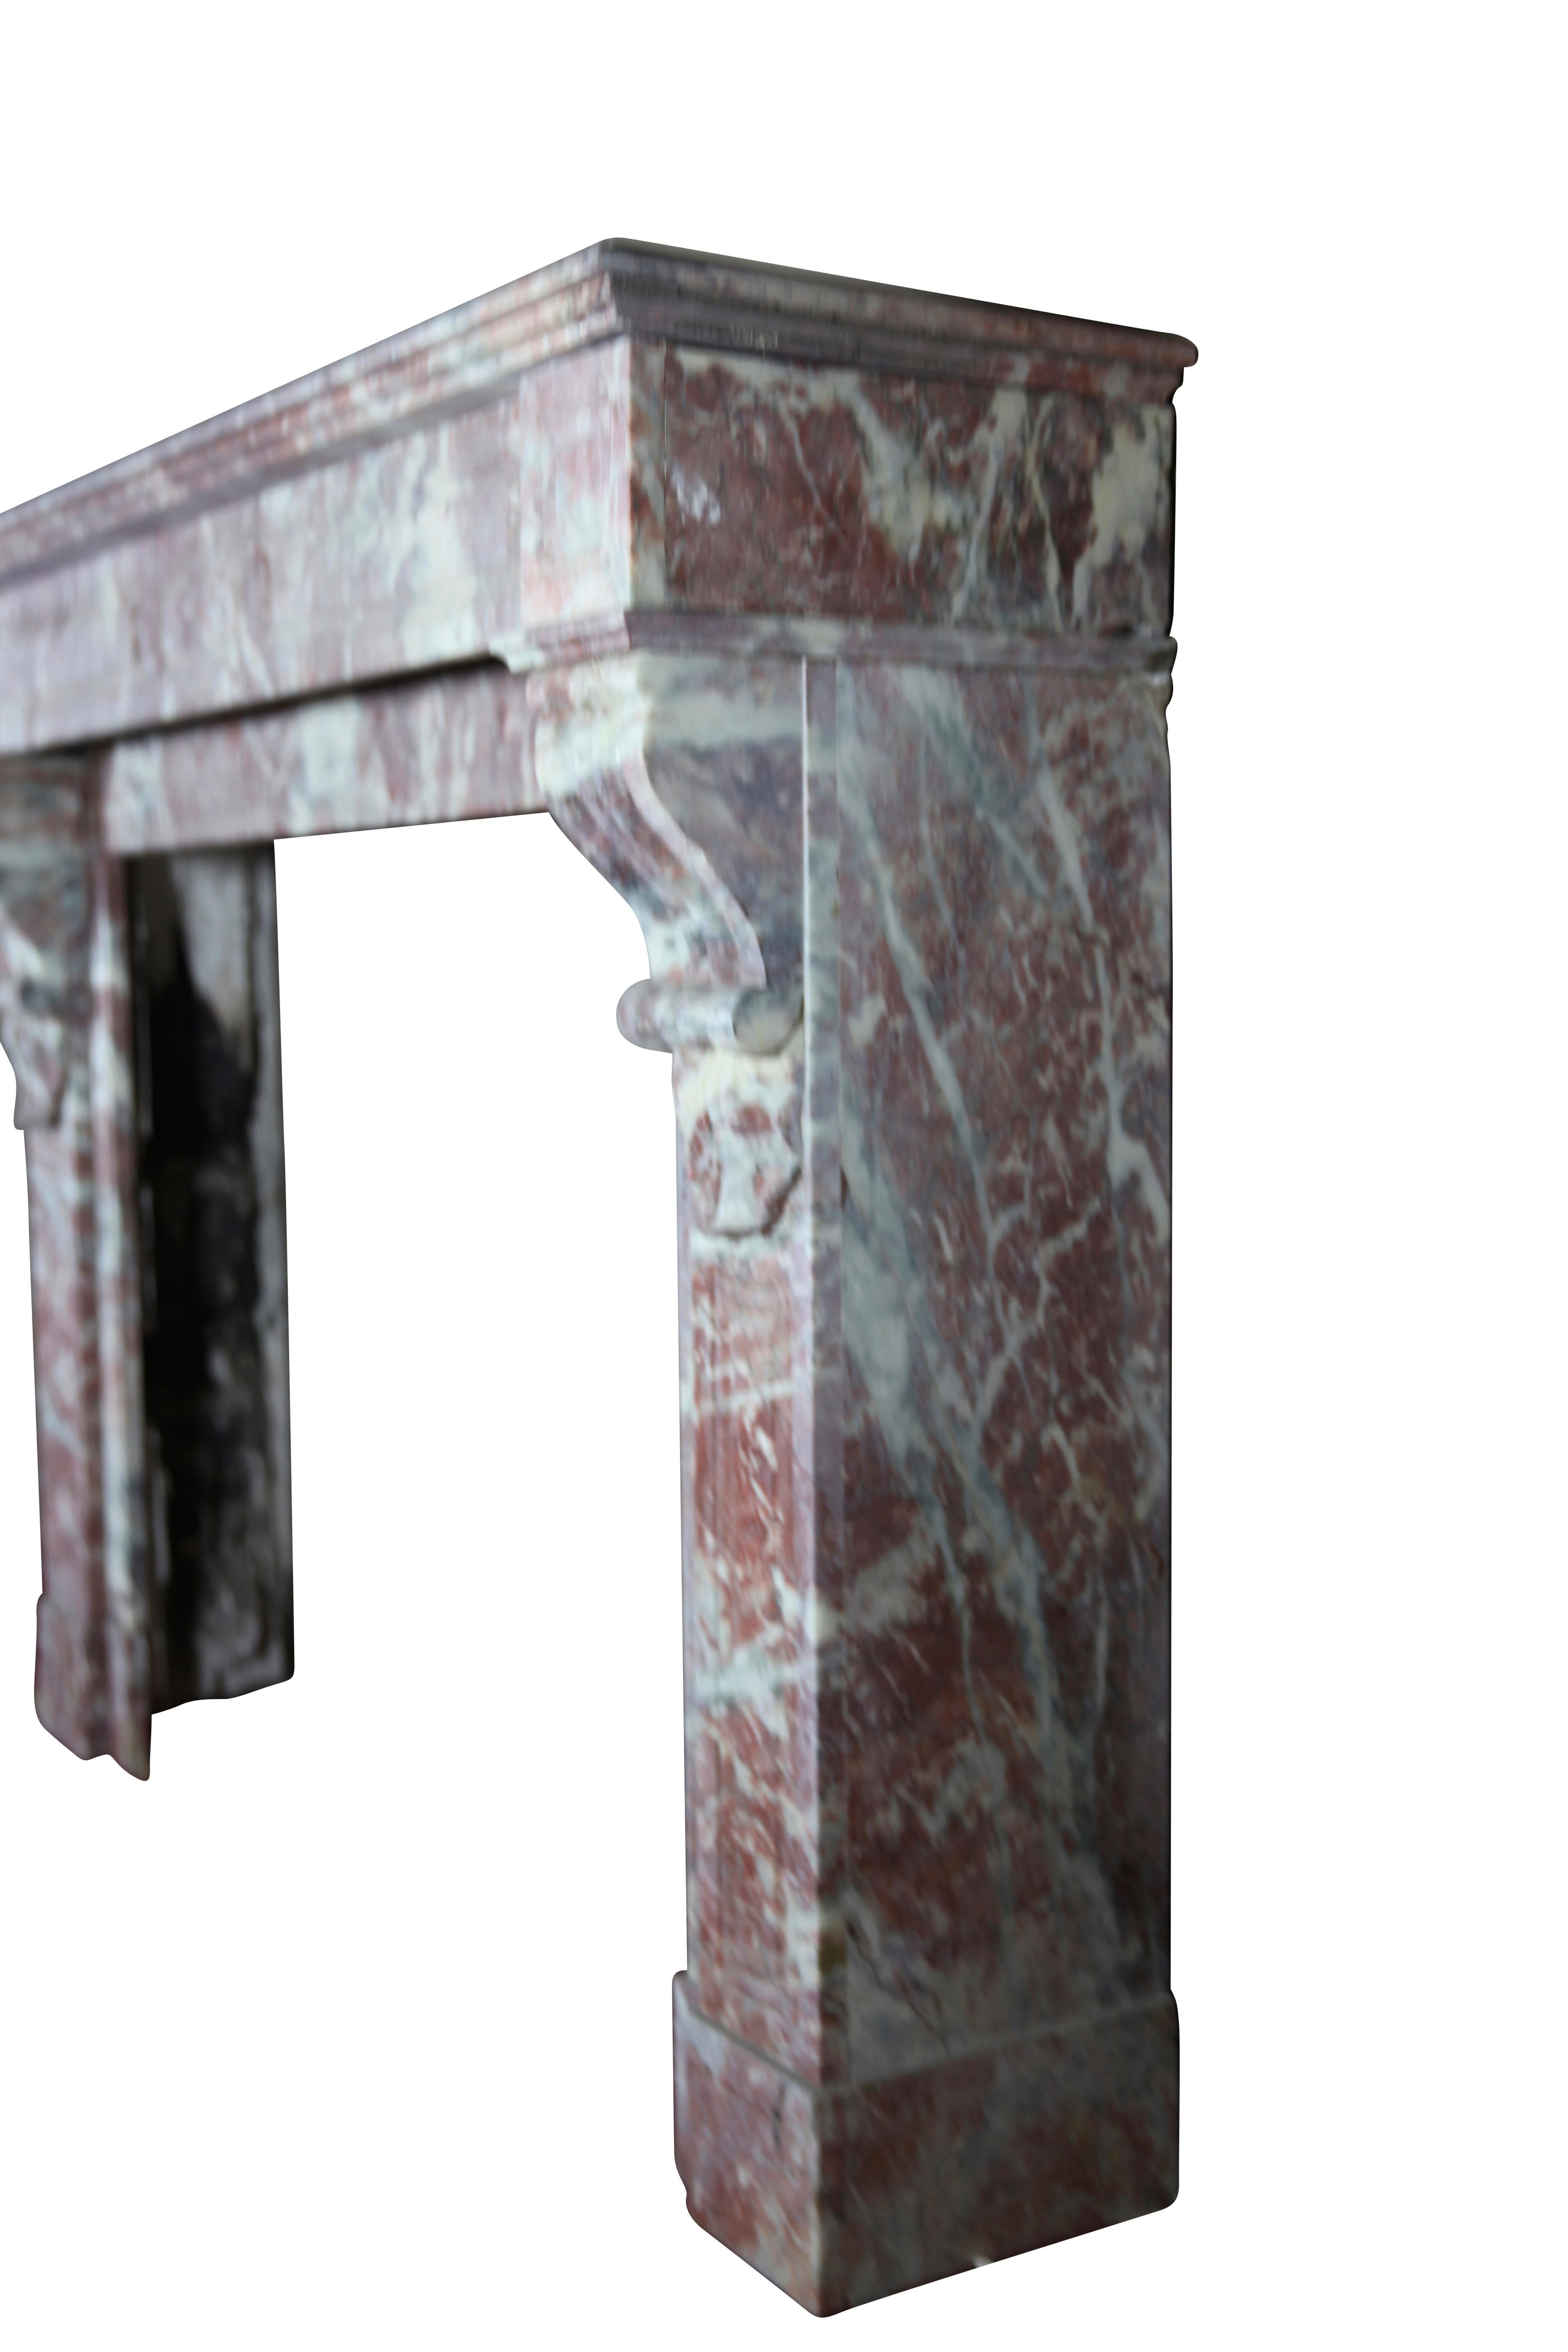 A fine Belgian antique fireplace mantel in a special color marble. 
This small chimney piece is of the Louis Philippe period, early 19th century.
A decorative element for elegant interior decor.
Measures:
140 cm Exterior Width 55.12 Inch
107 cm